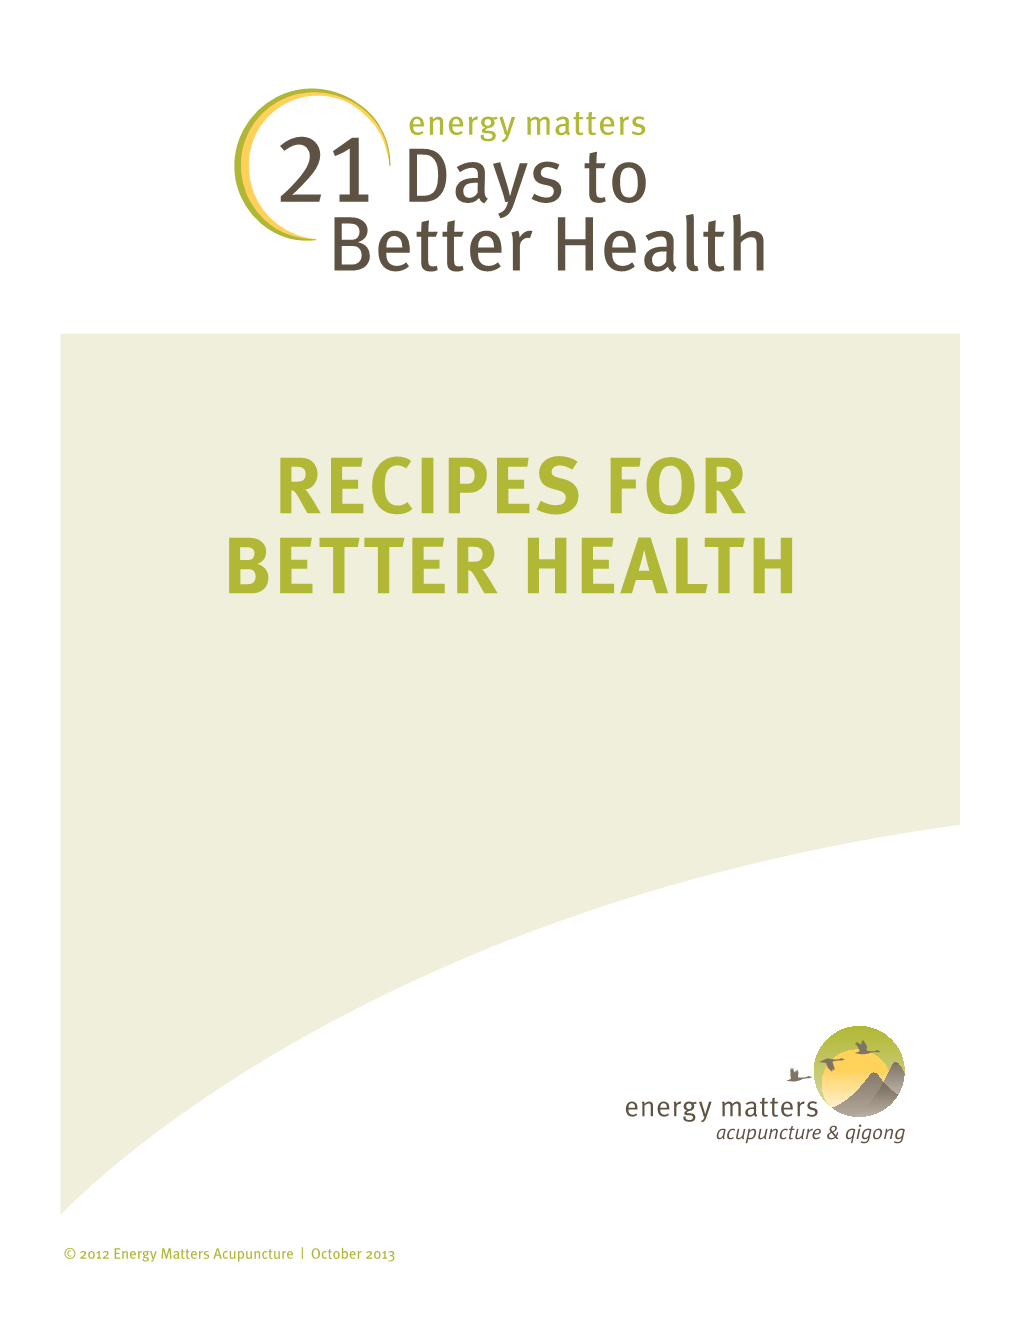 Recipes for Better Health